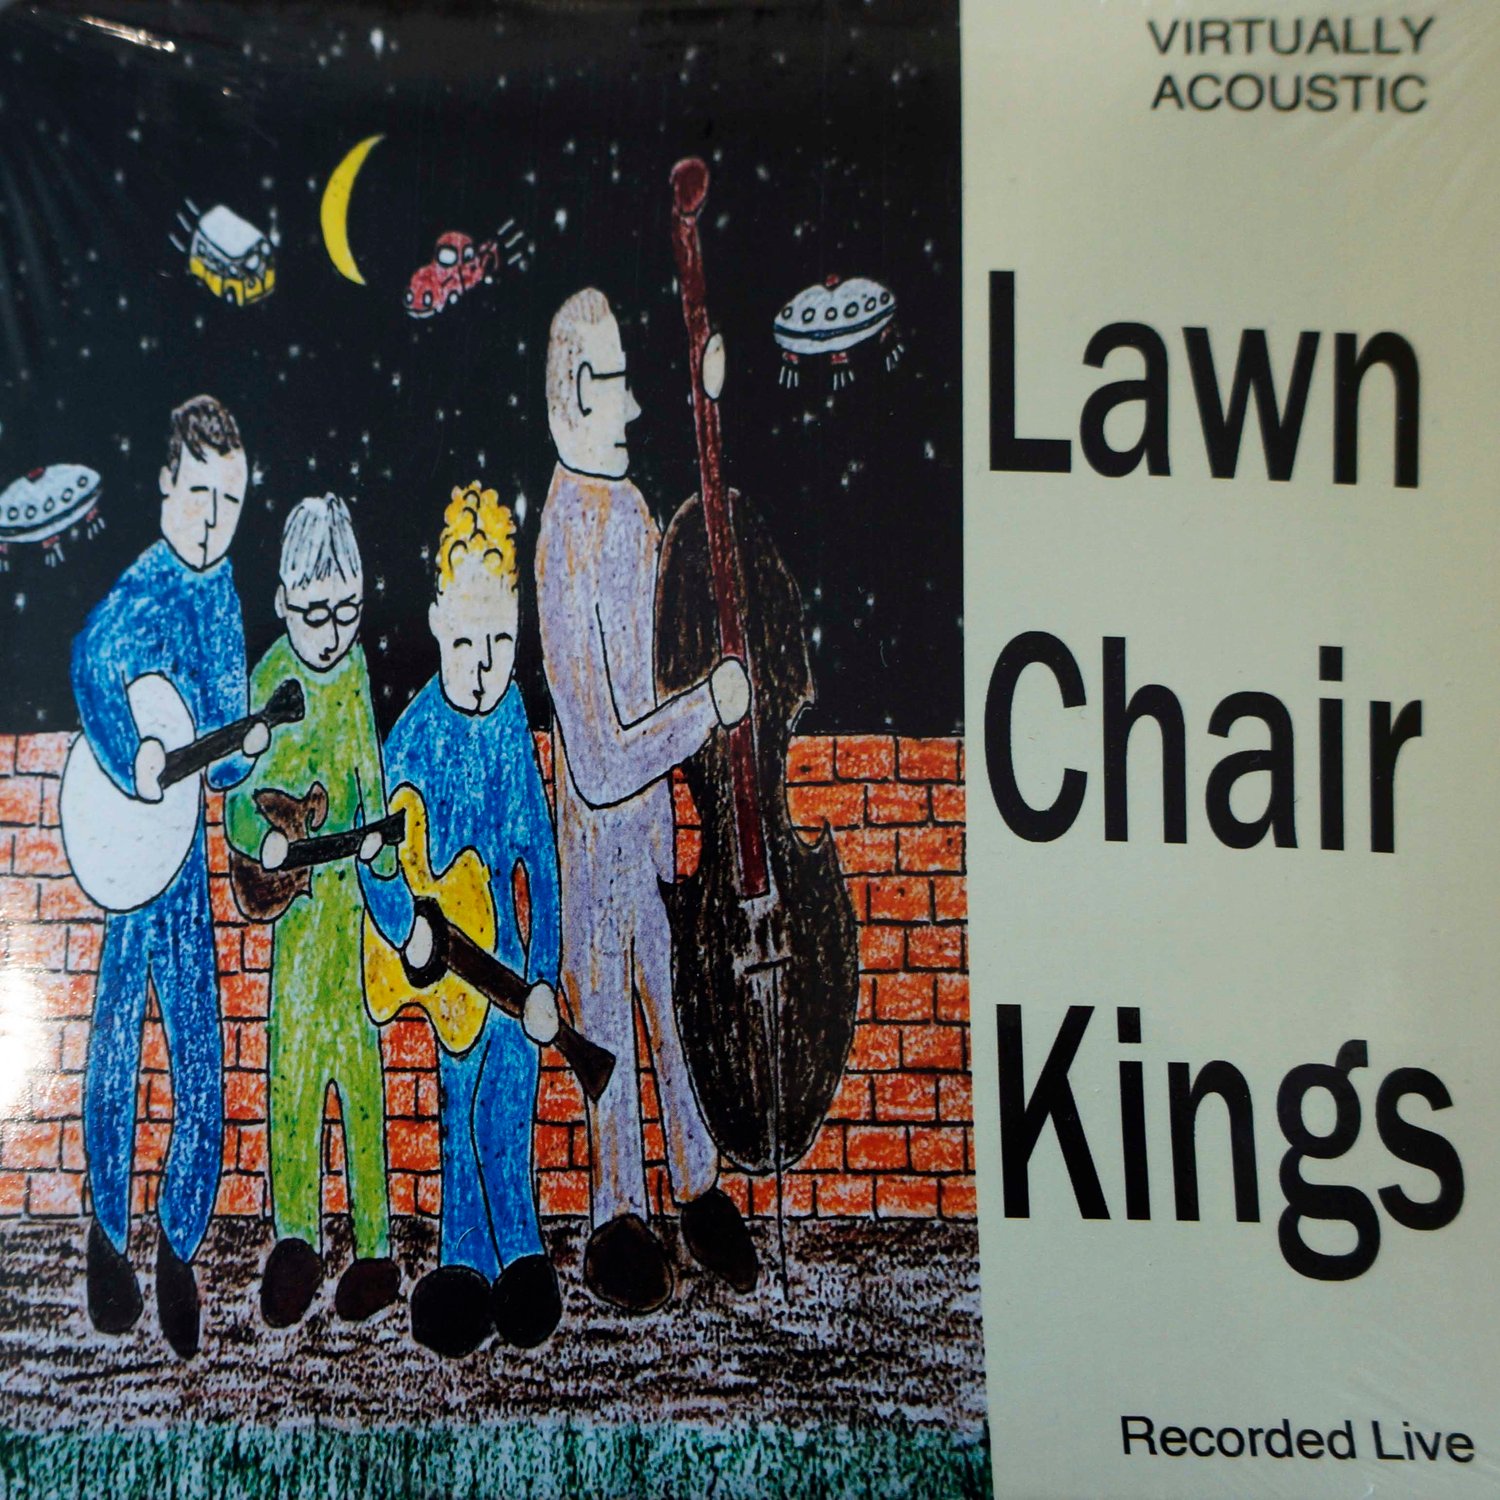 "Virtually Acoustic" CD by Lawn Chair Kings                  